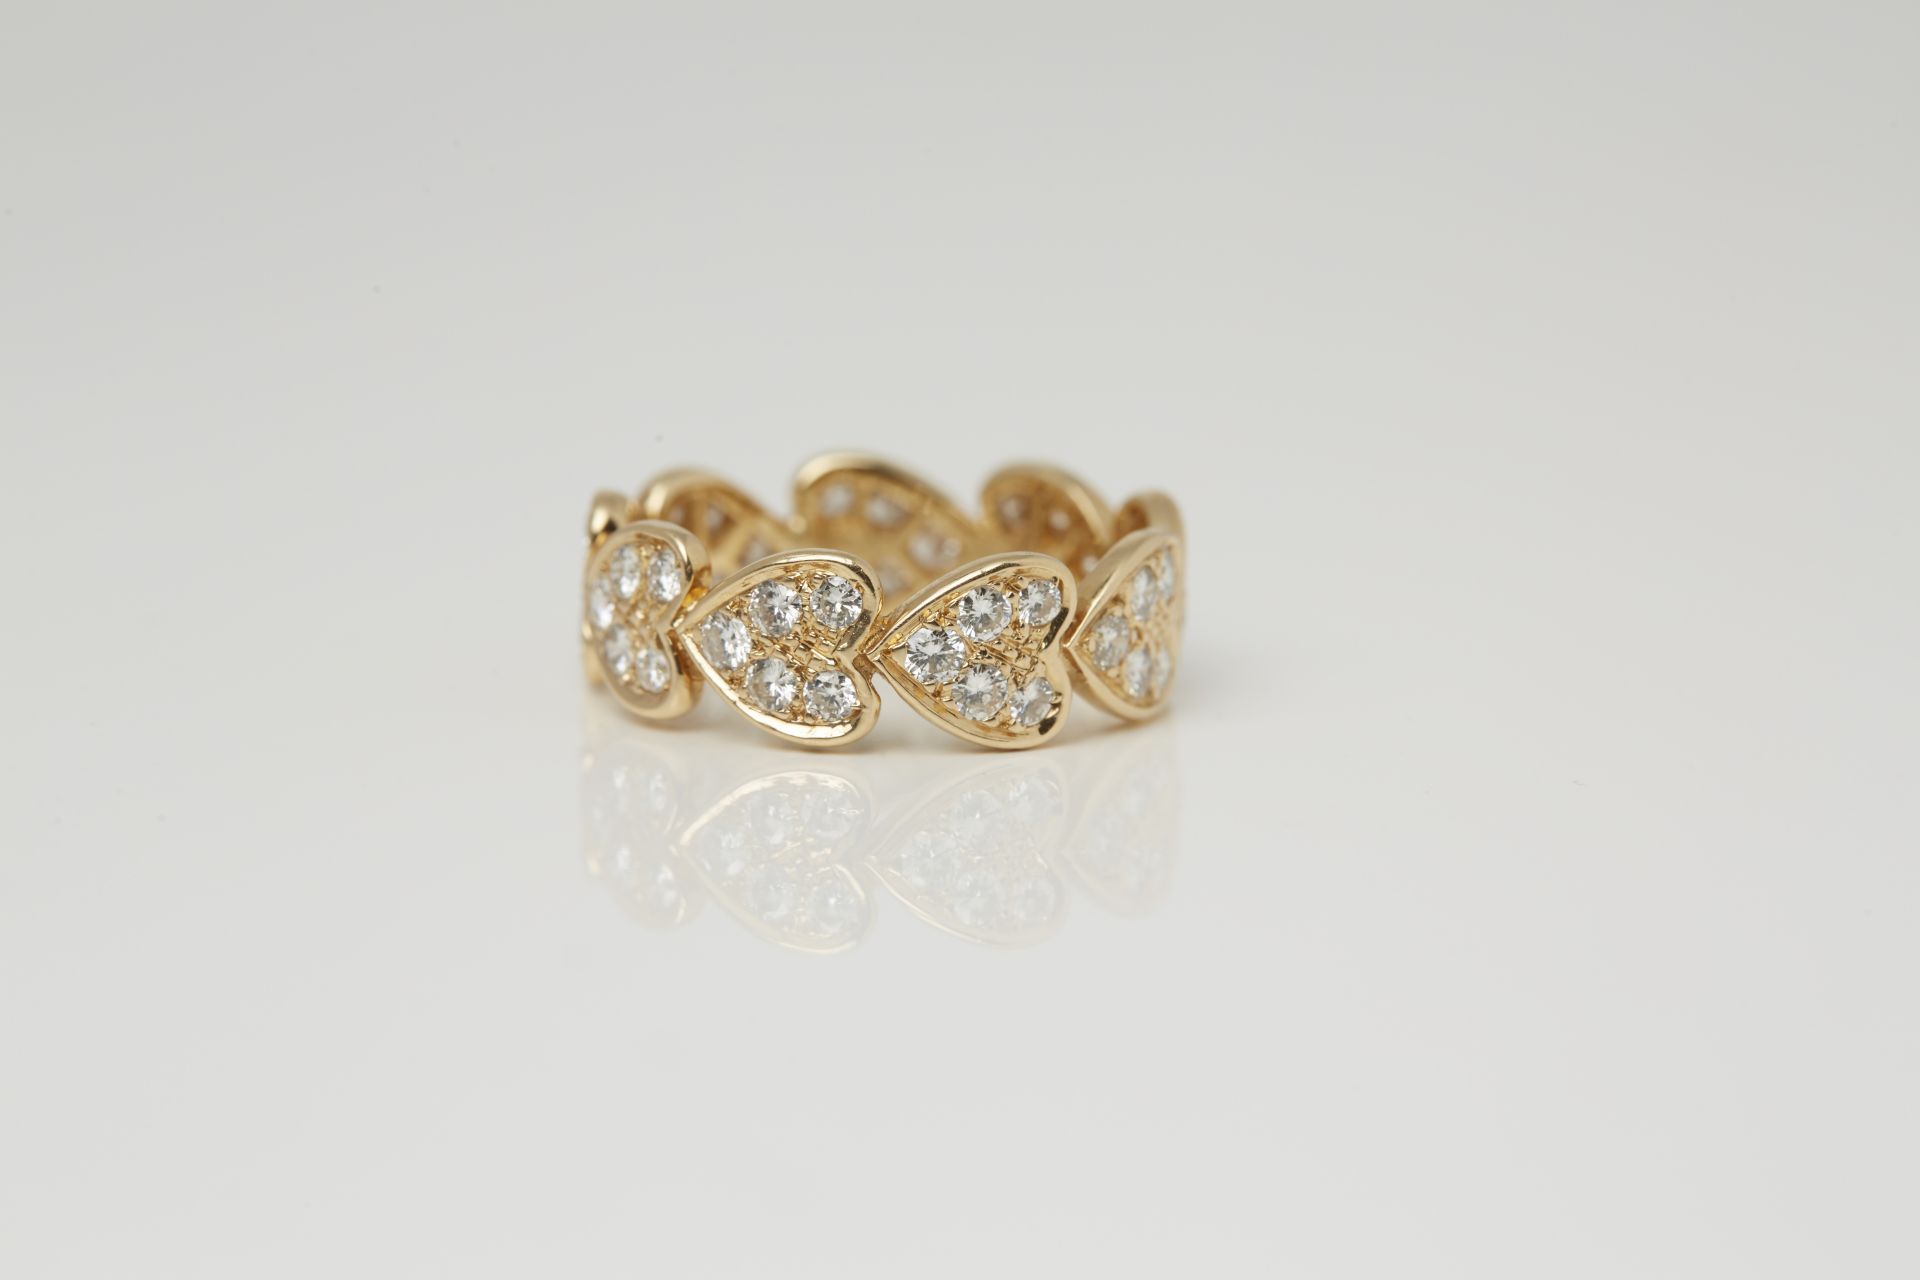 Cartier 18k Yellow Gold Diamond Heart Ring - Image 18 of 23